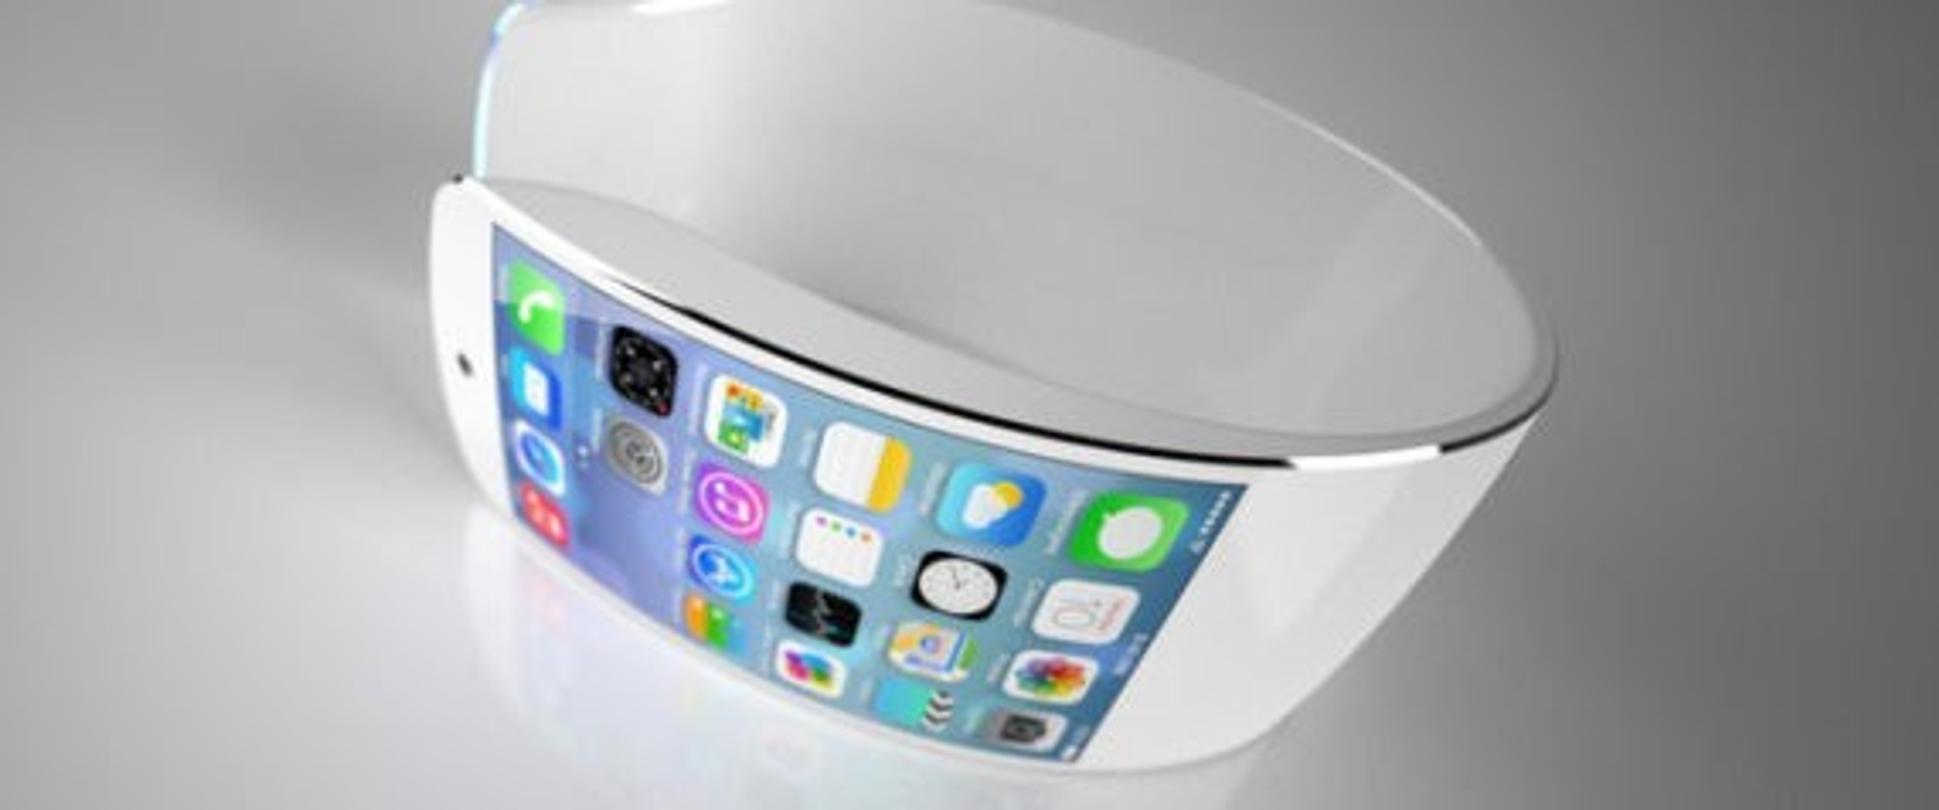 Concept iWatch Apple